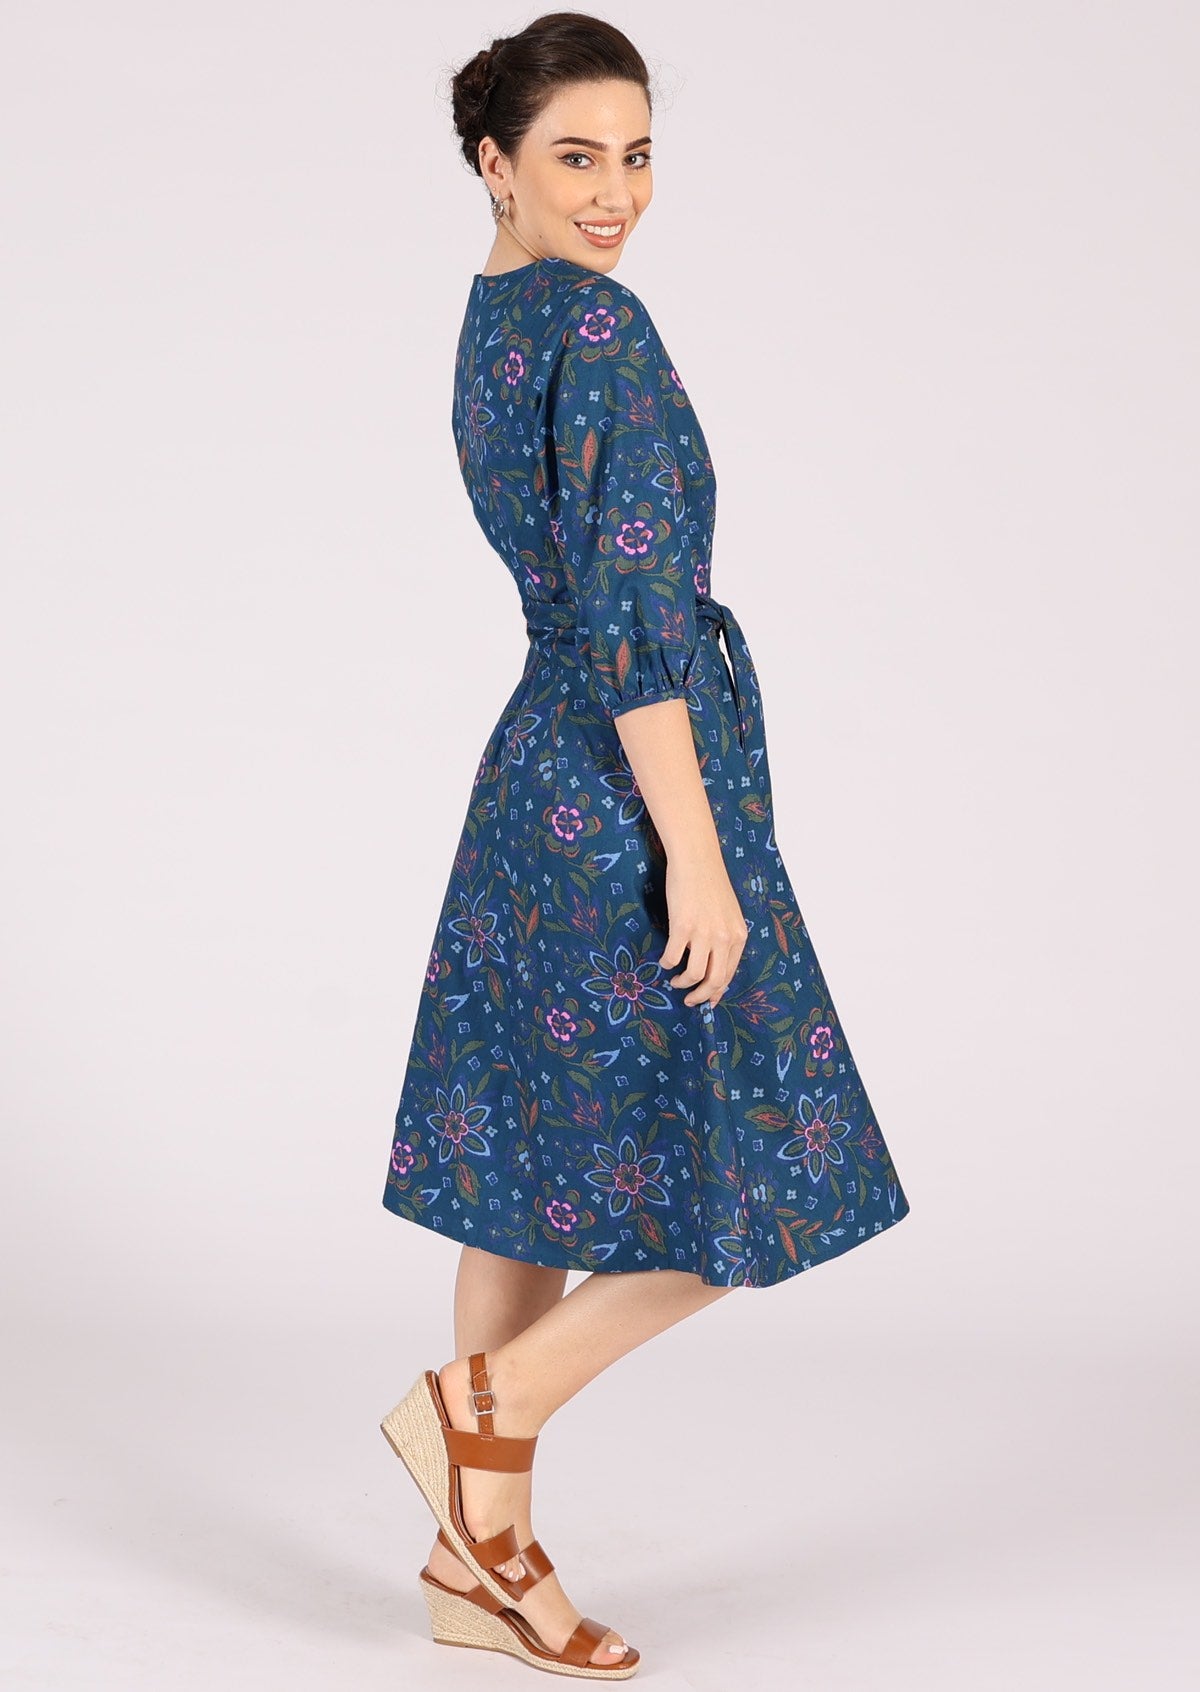 Cotton blue based floral dress has voluminous 3/4 sleeves.